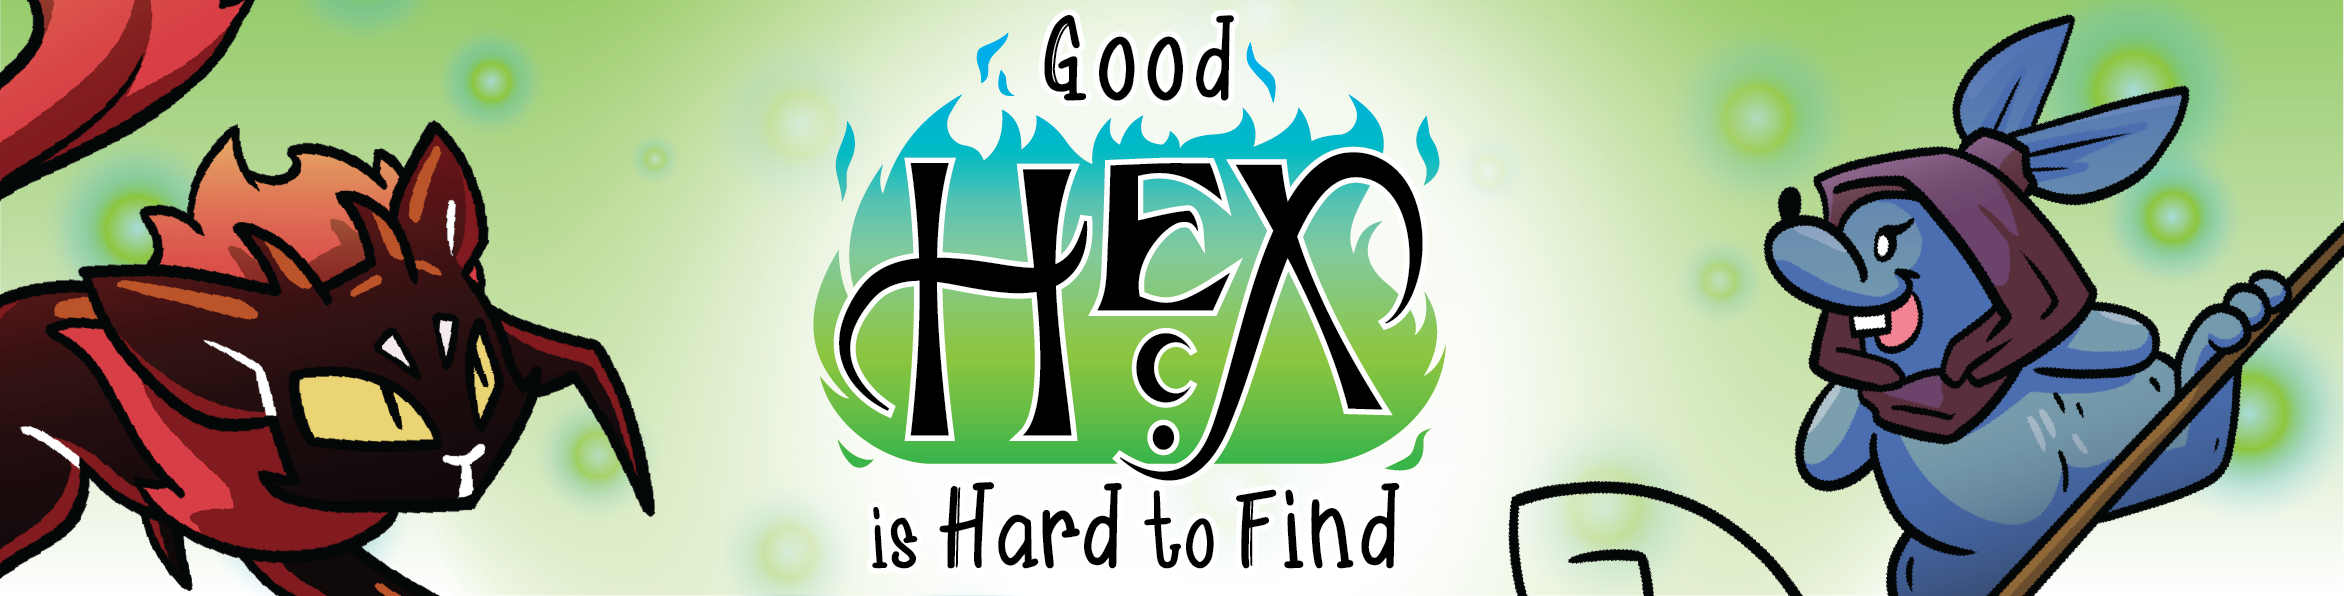 Good Hex is Hard to Find